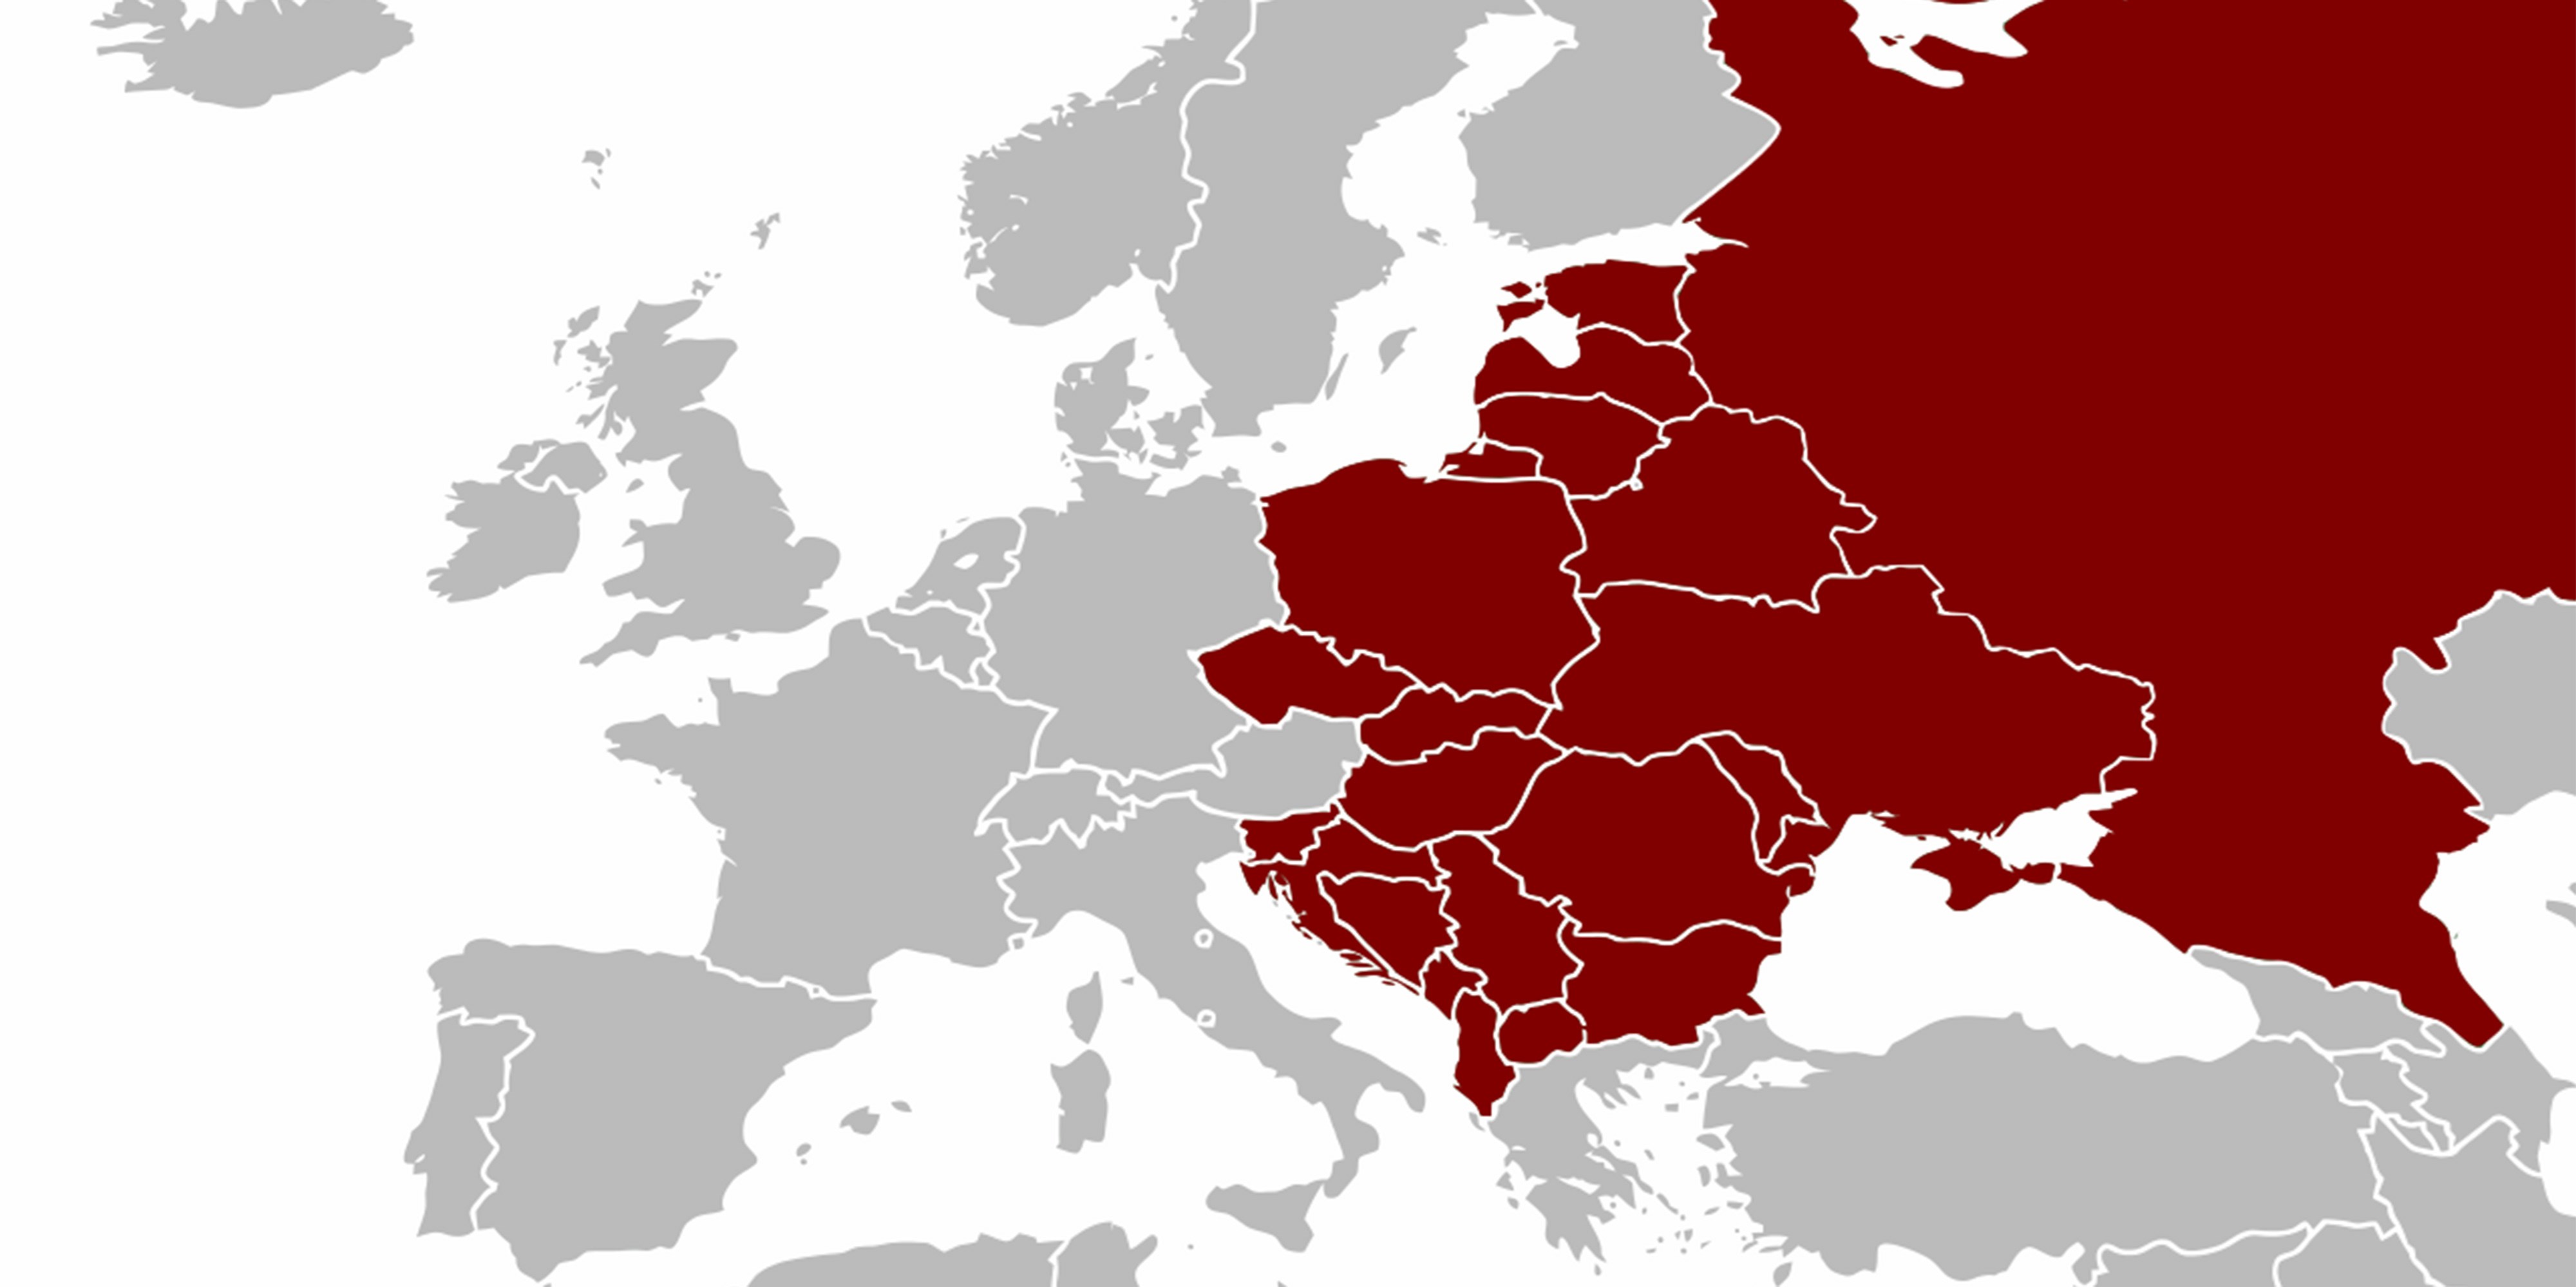 Map of Eastern Europe from Wikimedia Commons.